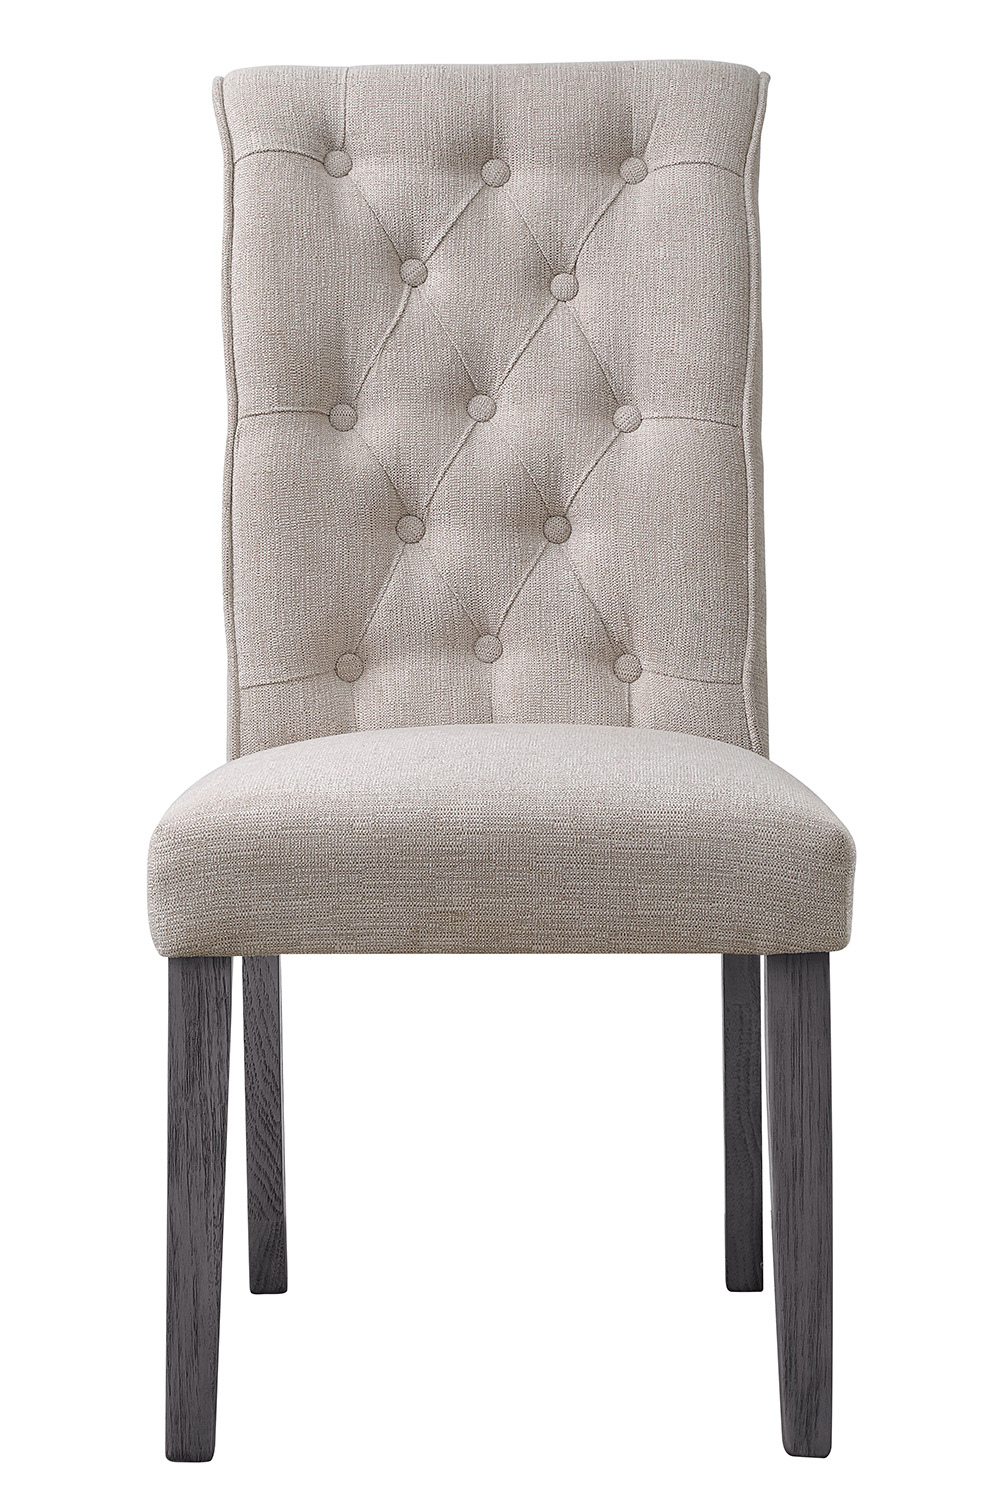 ACME Yabeina Linen Upholstered Dining Chair Set of 2, with Botton Tufted Backrest, and Wood Legs, for Restaurant, Cafe, Tavern, Office, Living Room - Beige